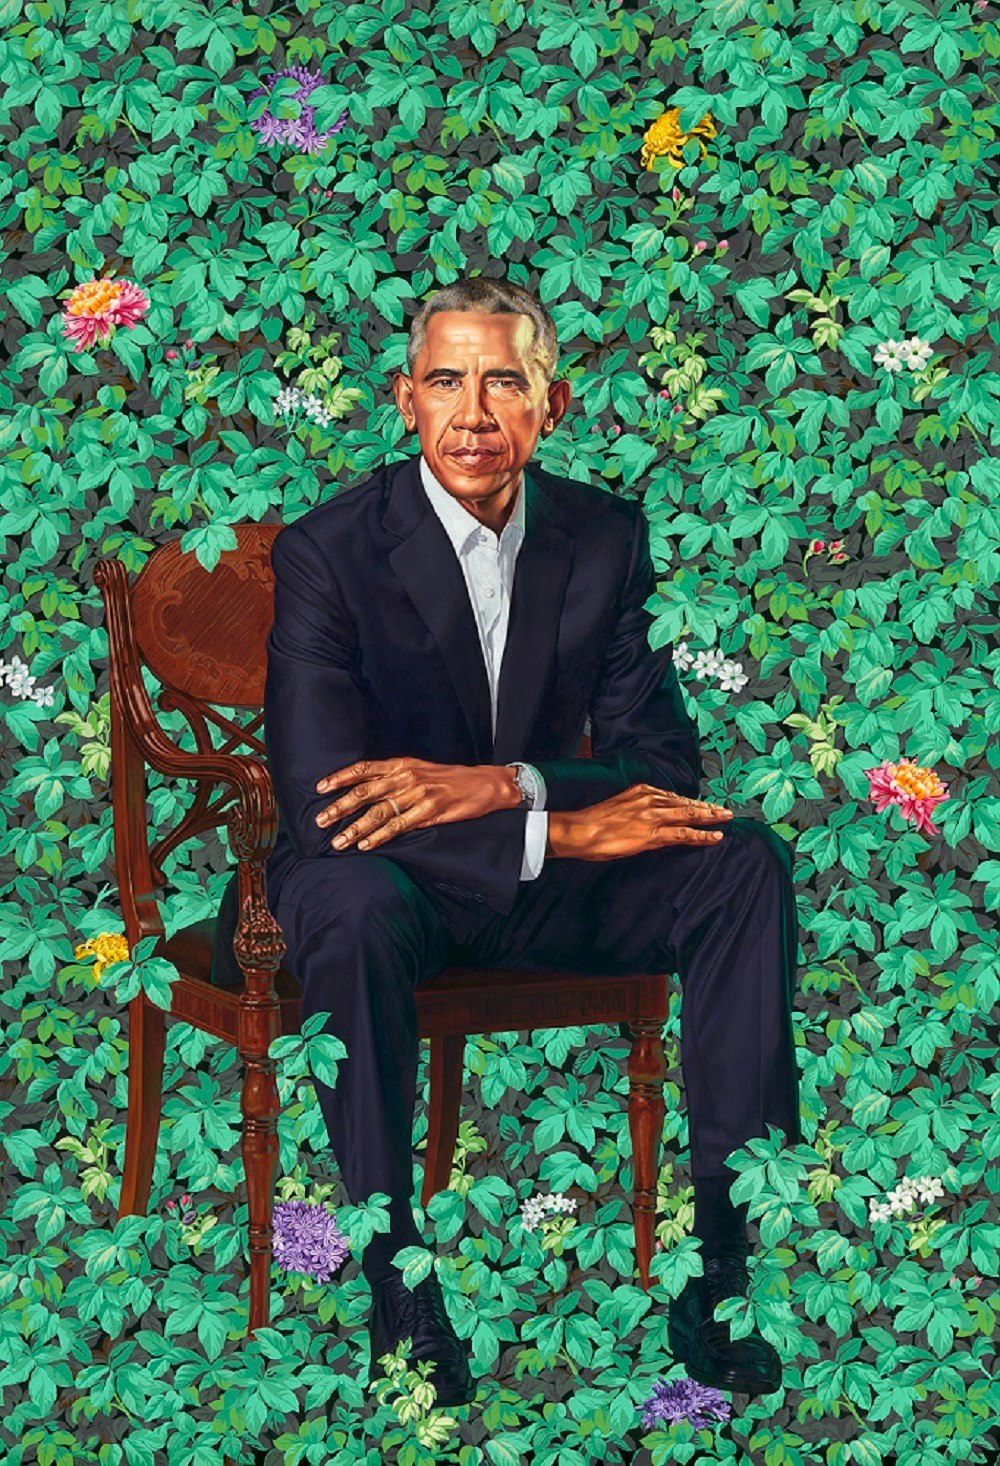 A portrait of Barack Obama by Kehinde Wiley